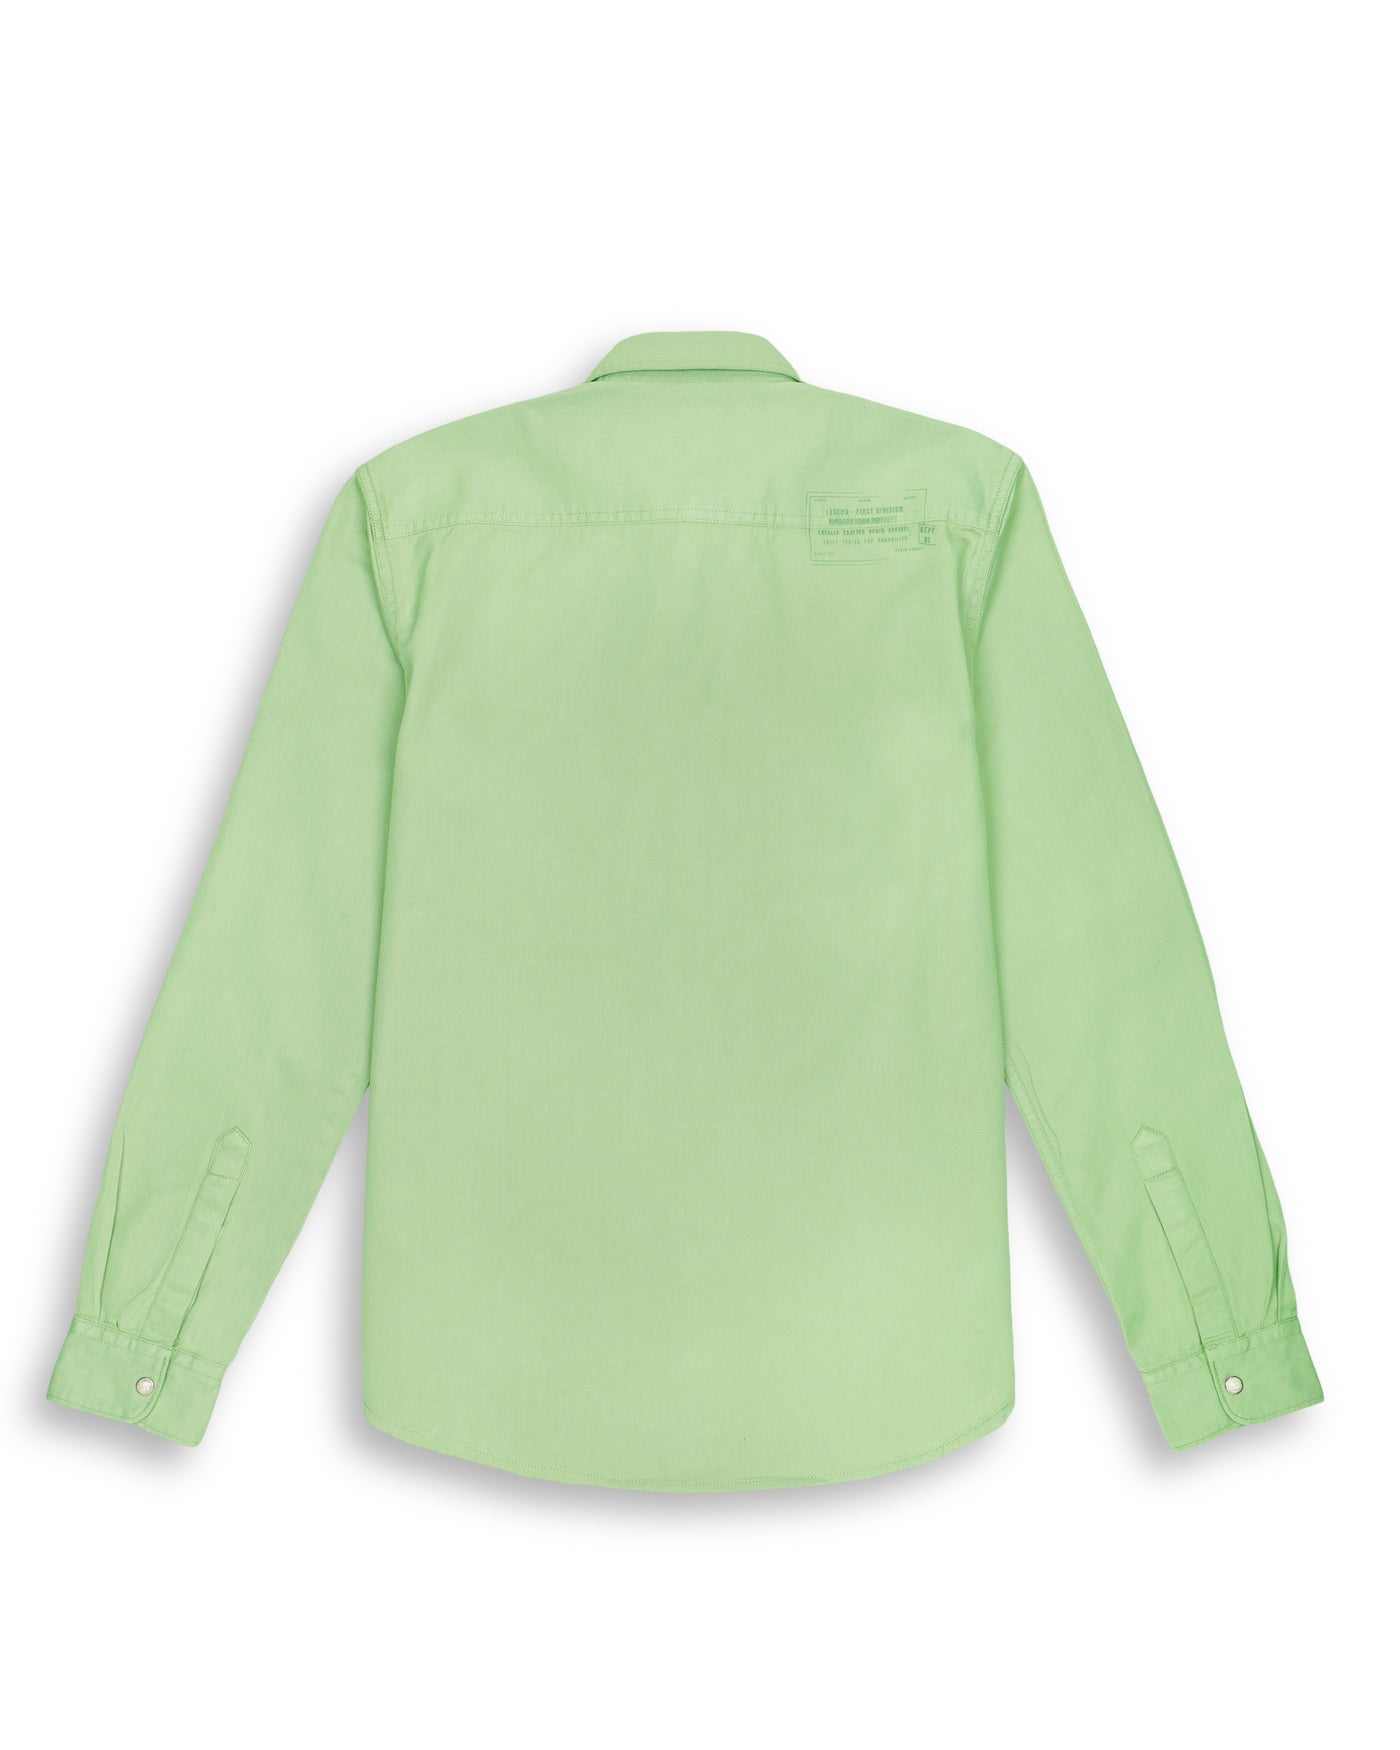 DOUBLE POCKET SOLID SHIRT IN SAGE GREEN